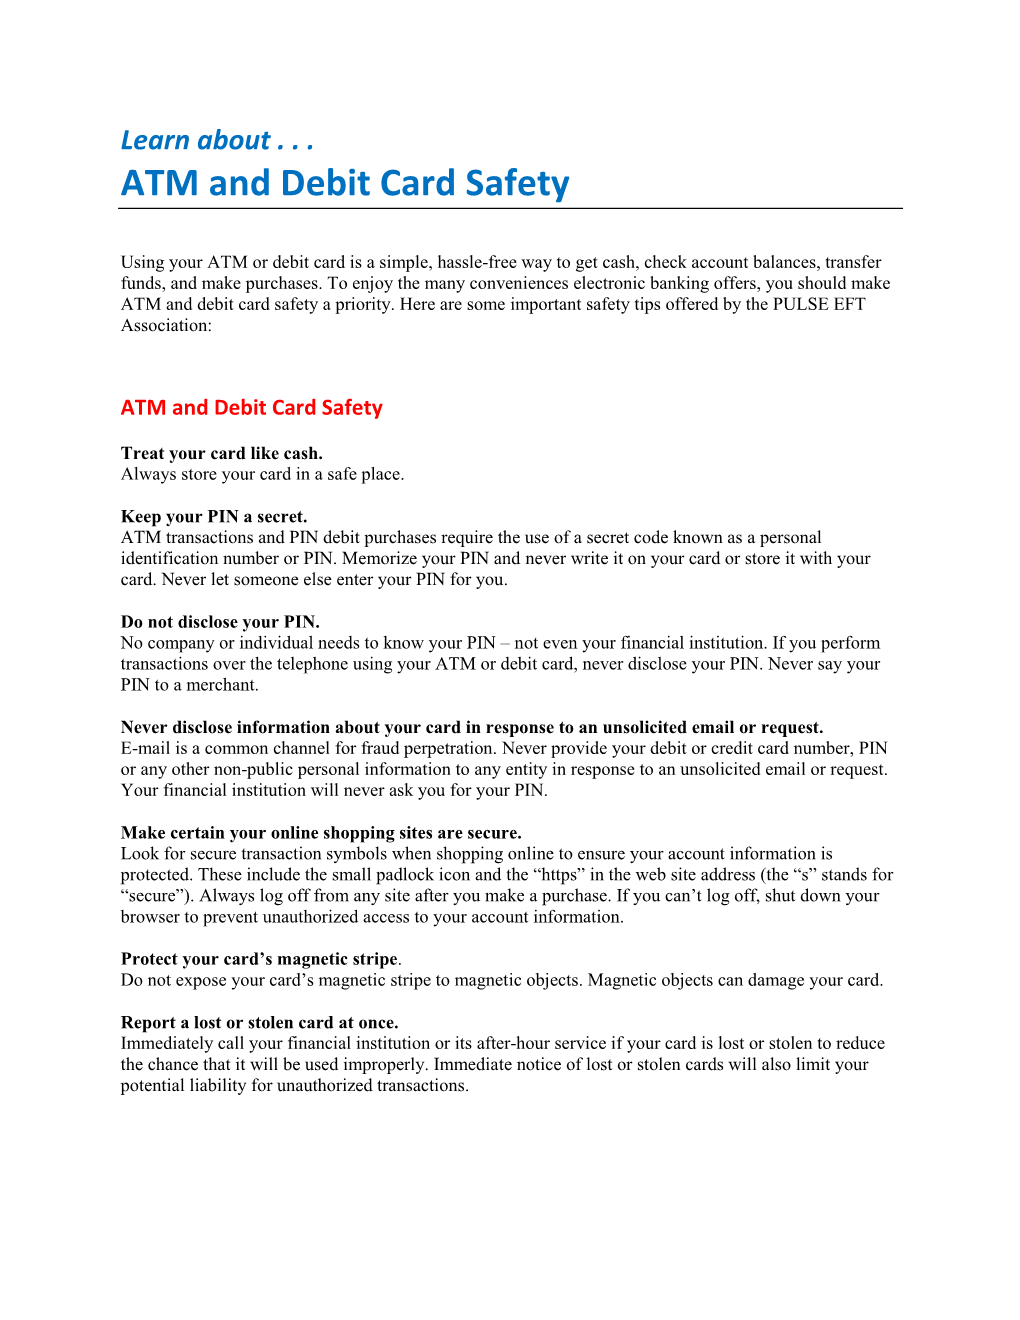 ATM and Debit Card Safety